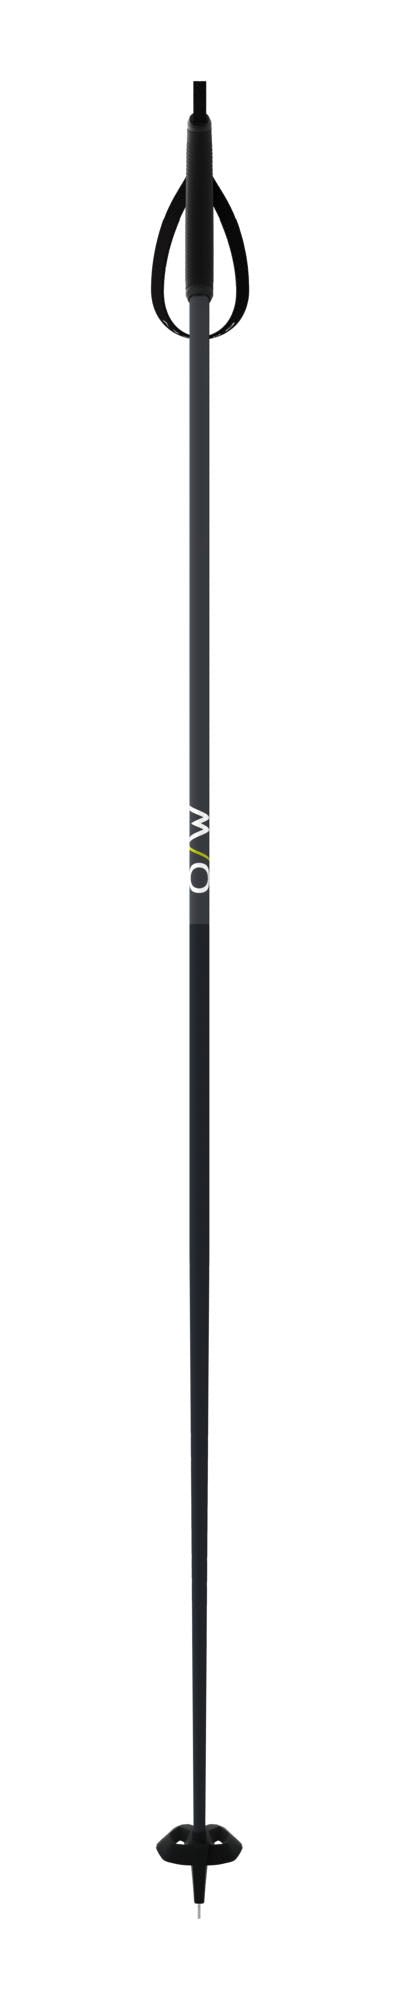 Boone Mountain Sports - BC OFFTRACK POLE